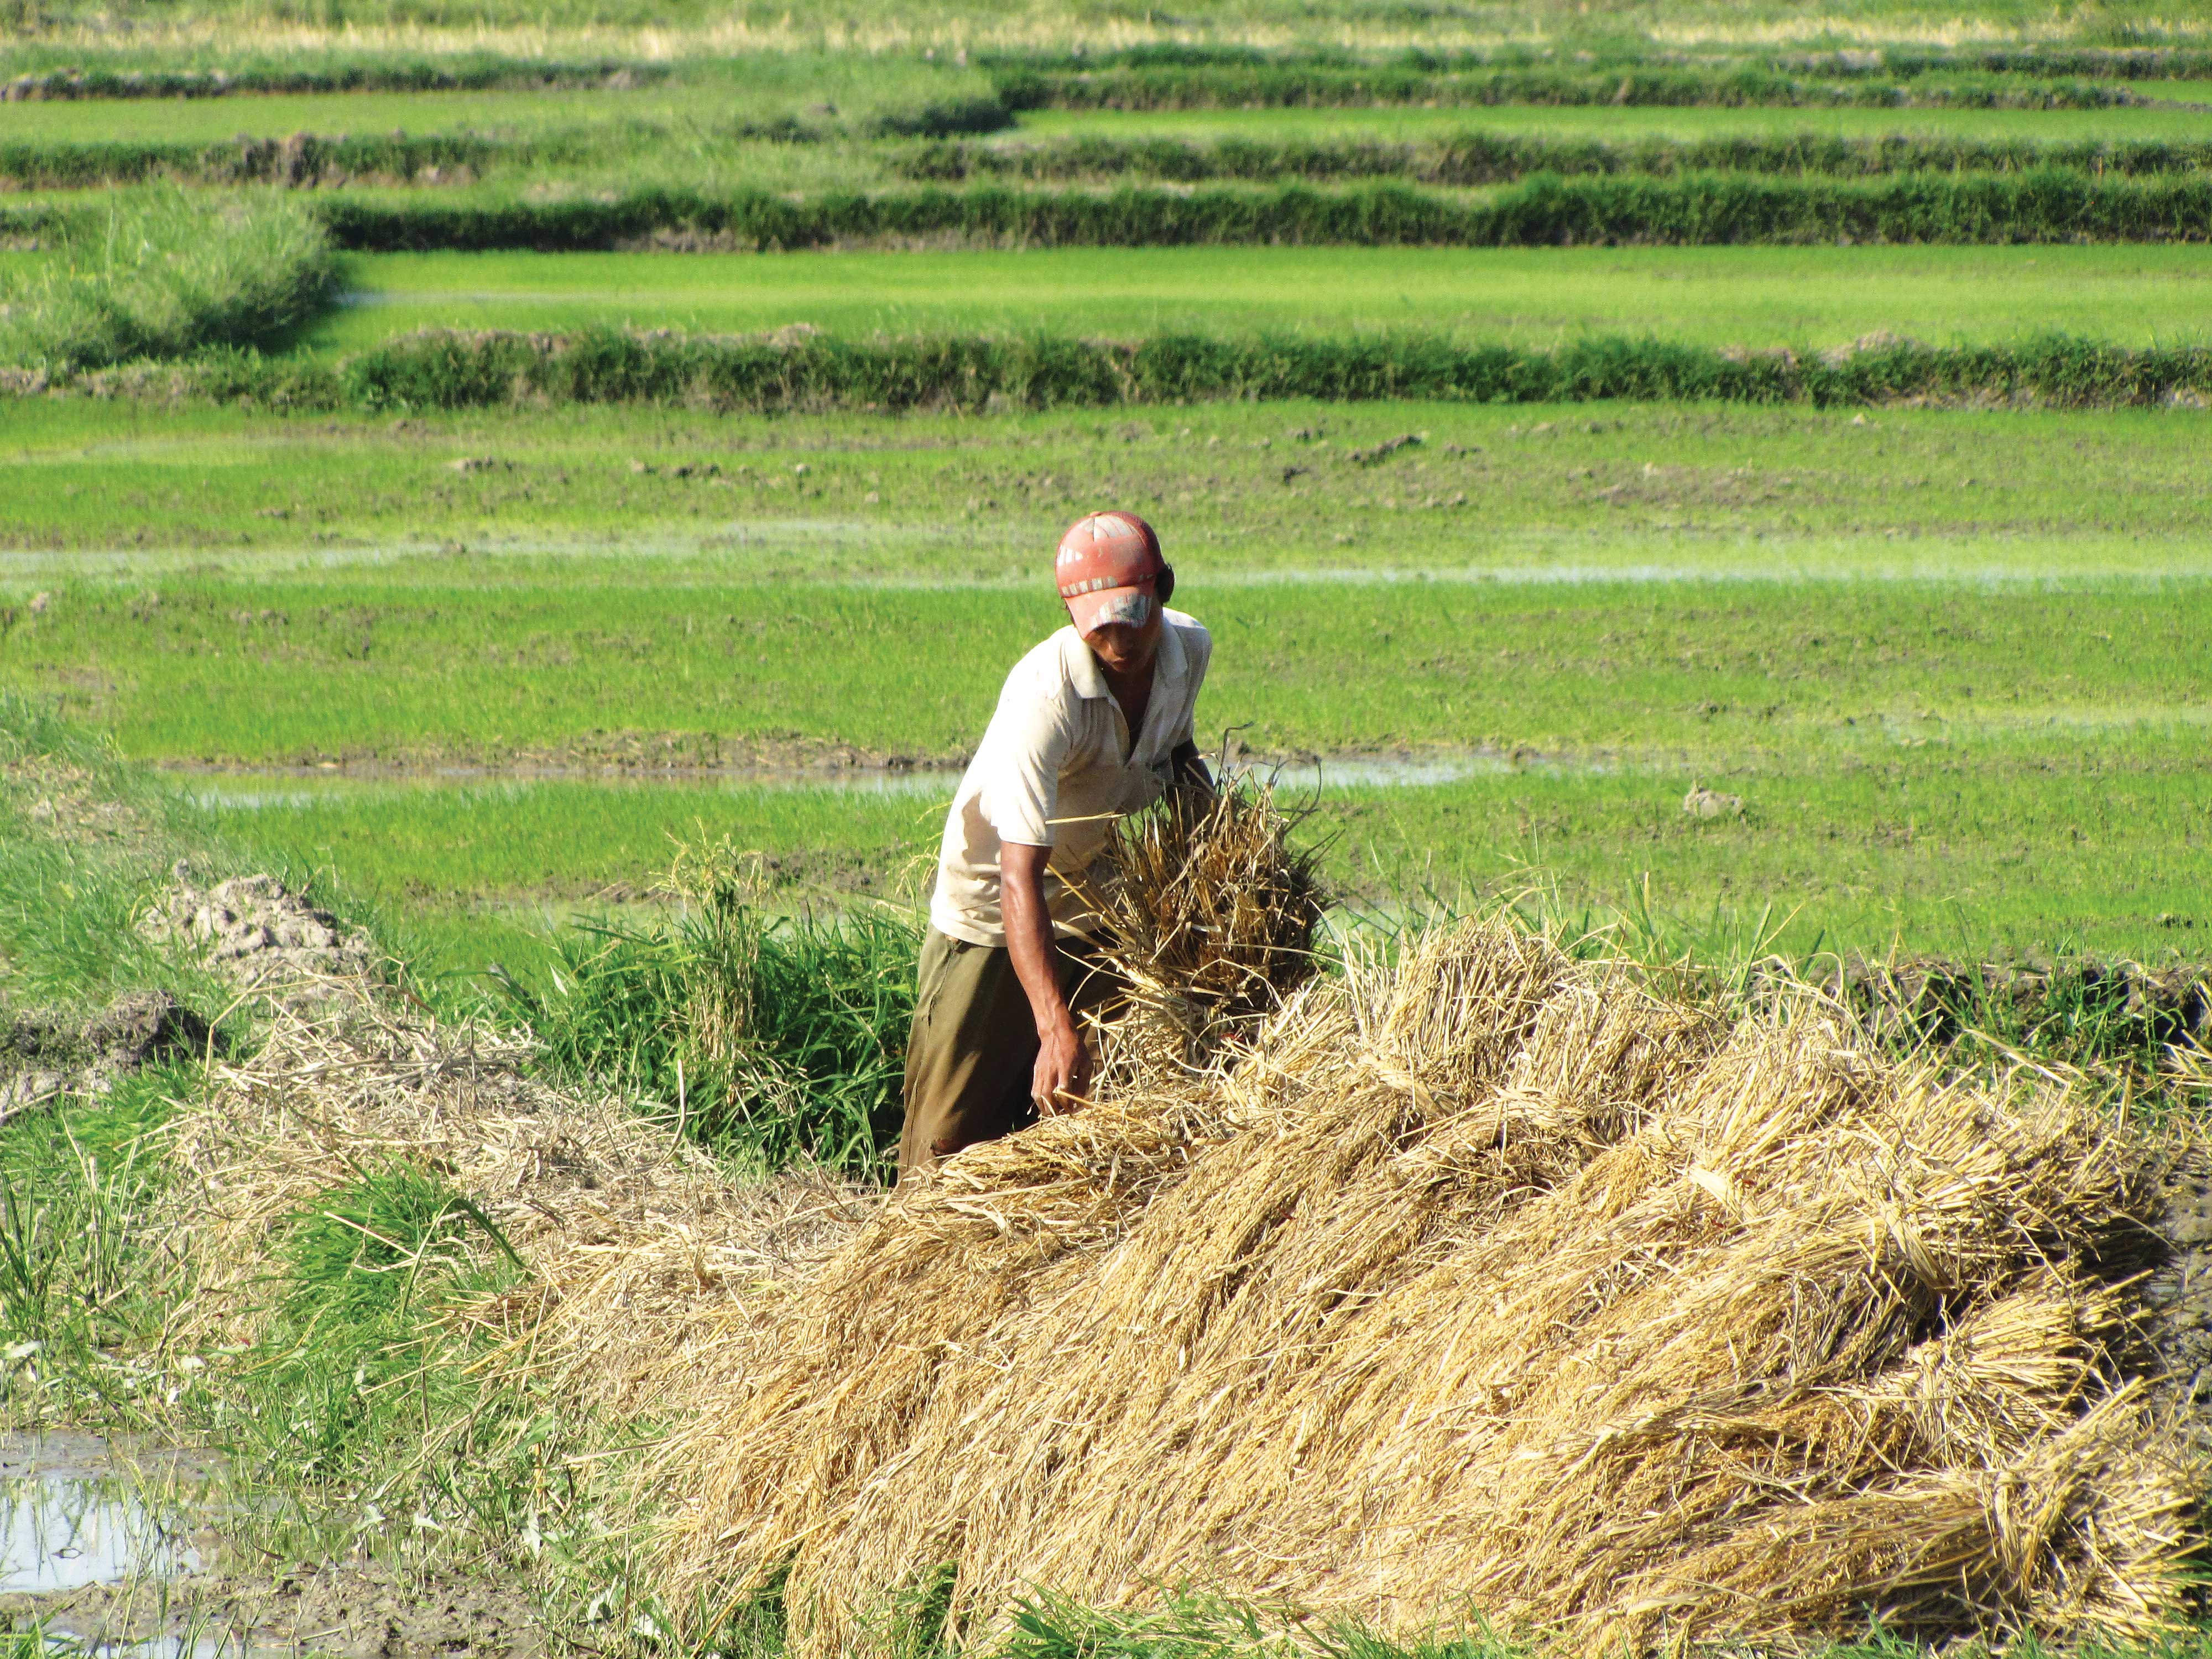 A man collecting straw in a field.